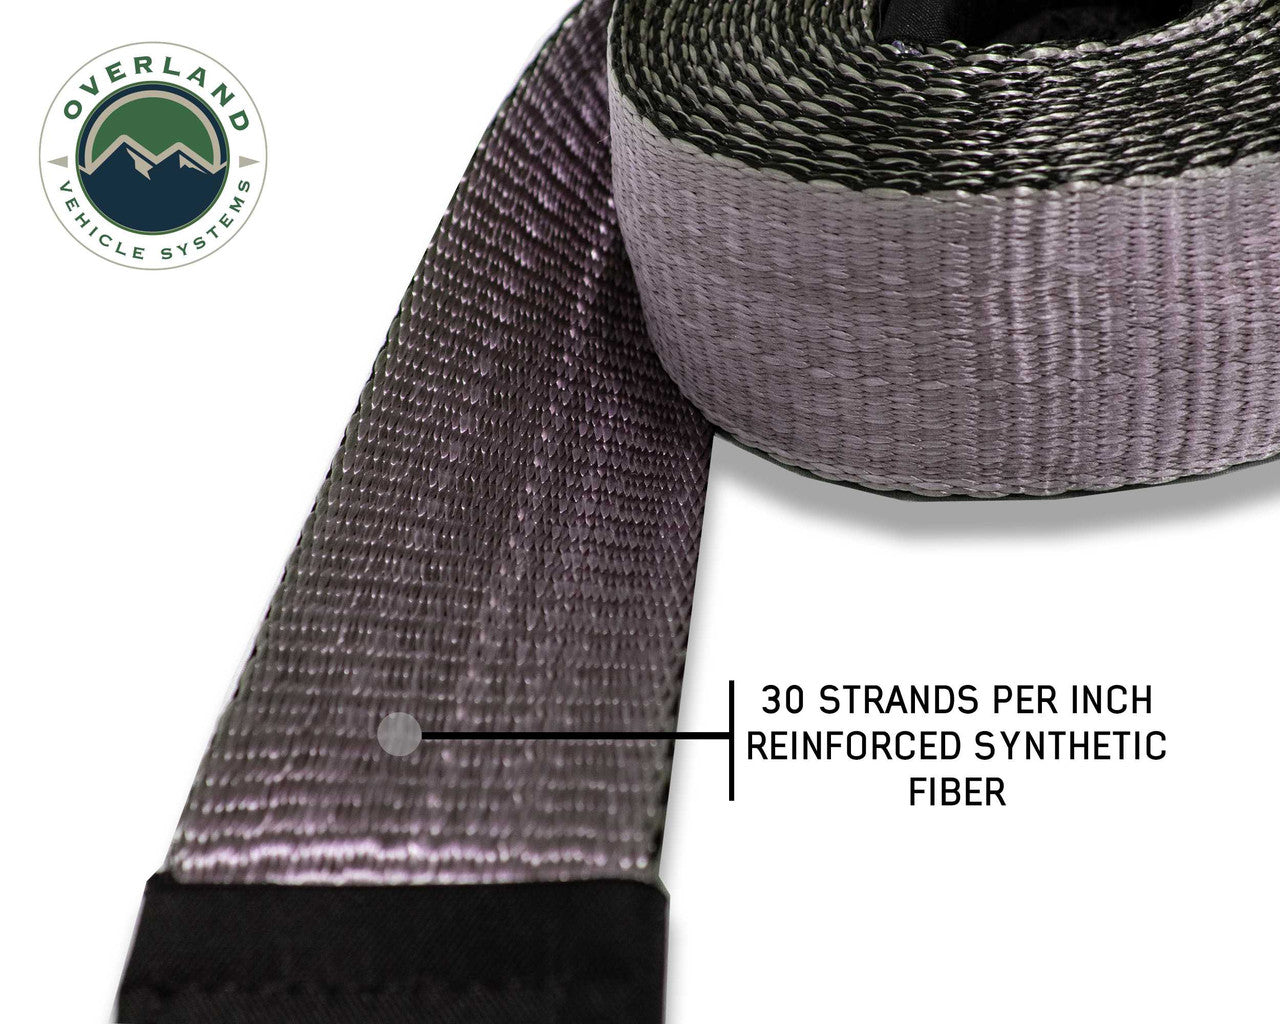 OVS Tow Strap 20,000 Lb. 2" X 30' Gray With Black Ends & Storage Bag